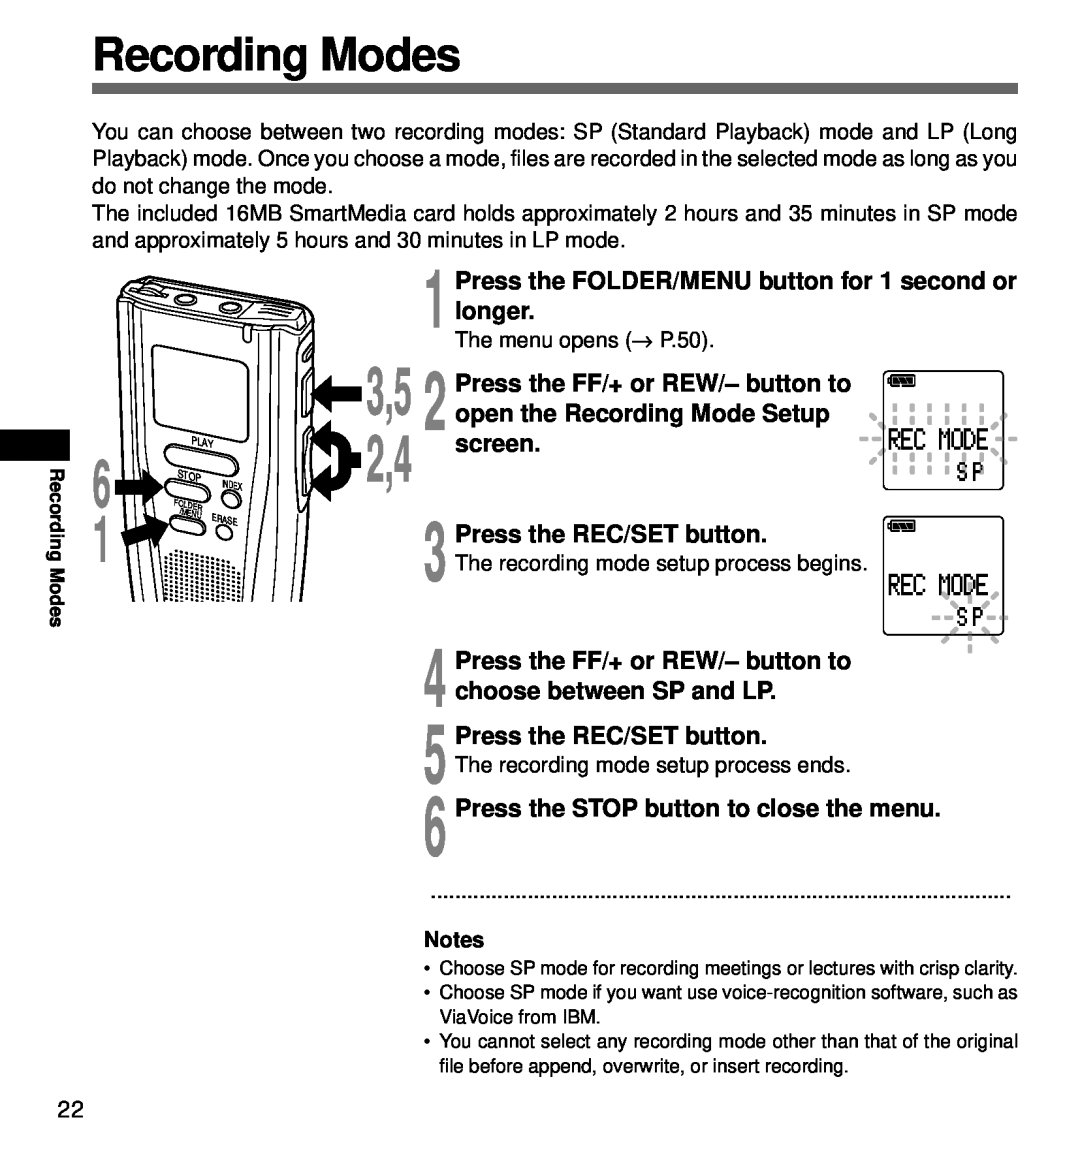 Olympus DS-3000 Recording Modes, Press the FOLDER/MENU button for 1 second or longer, Press the REC/SET button, 3,5 2,4 